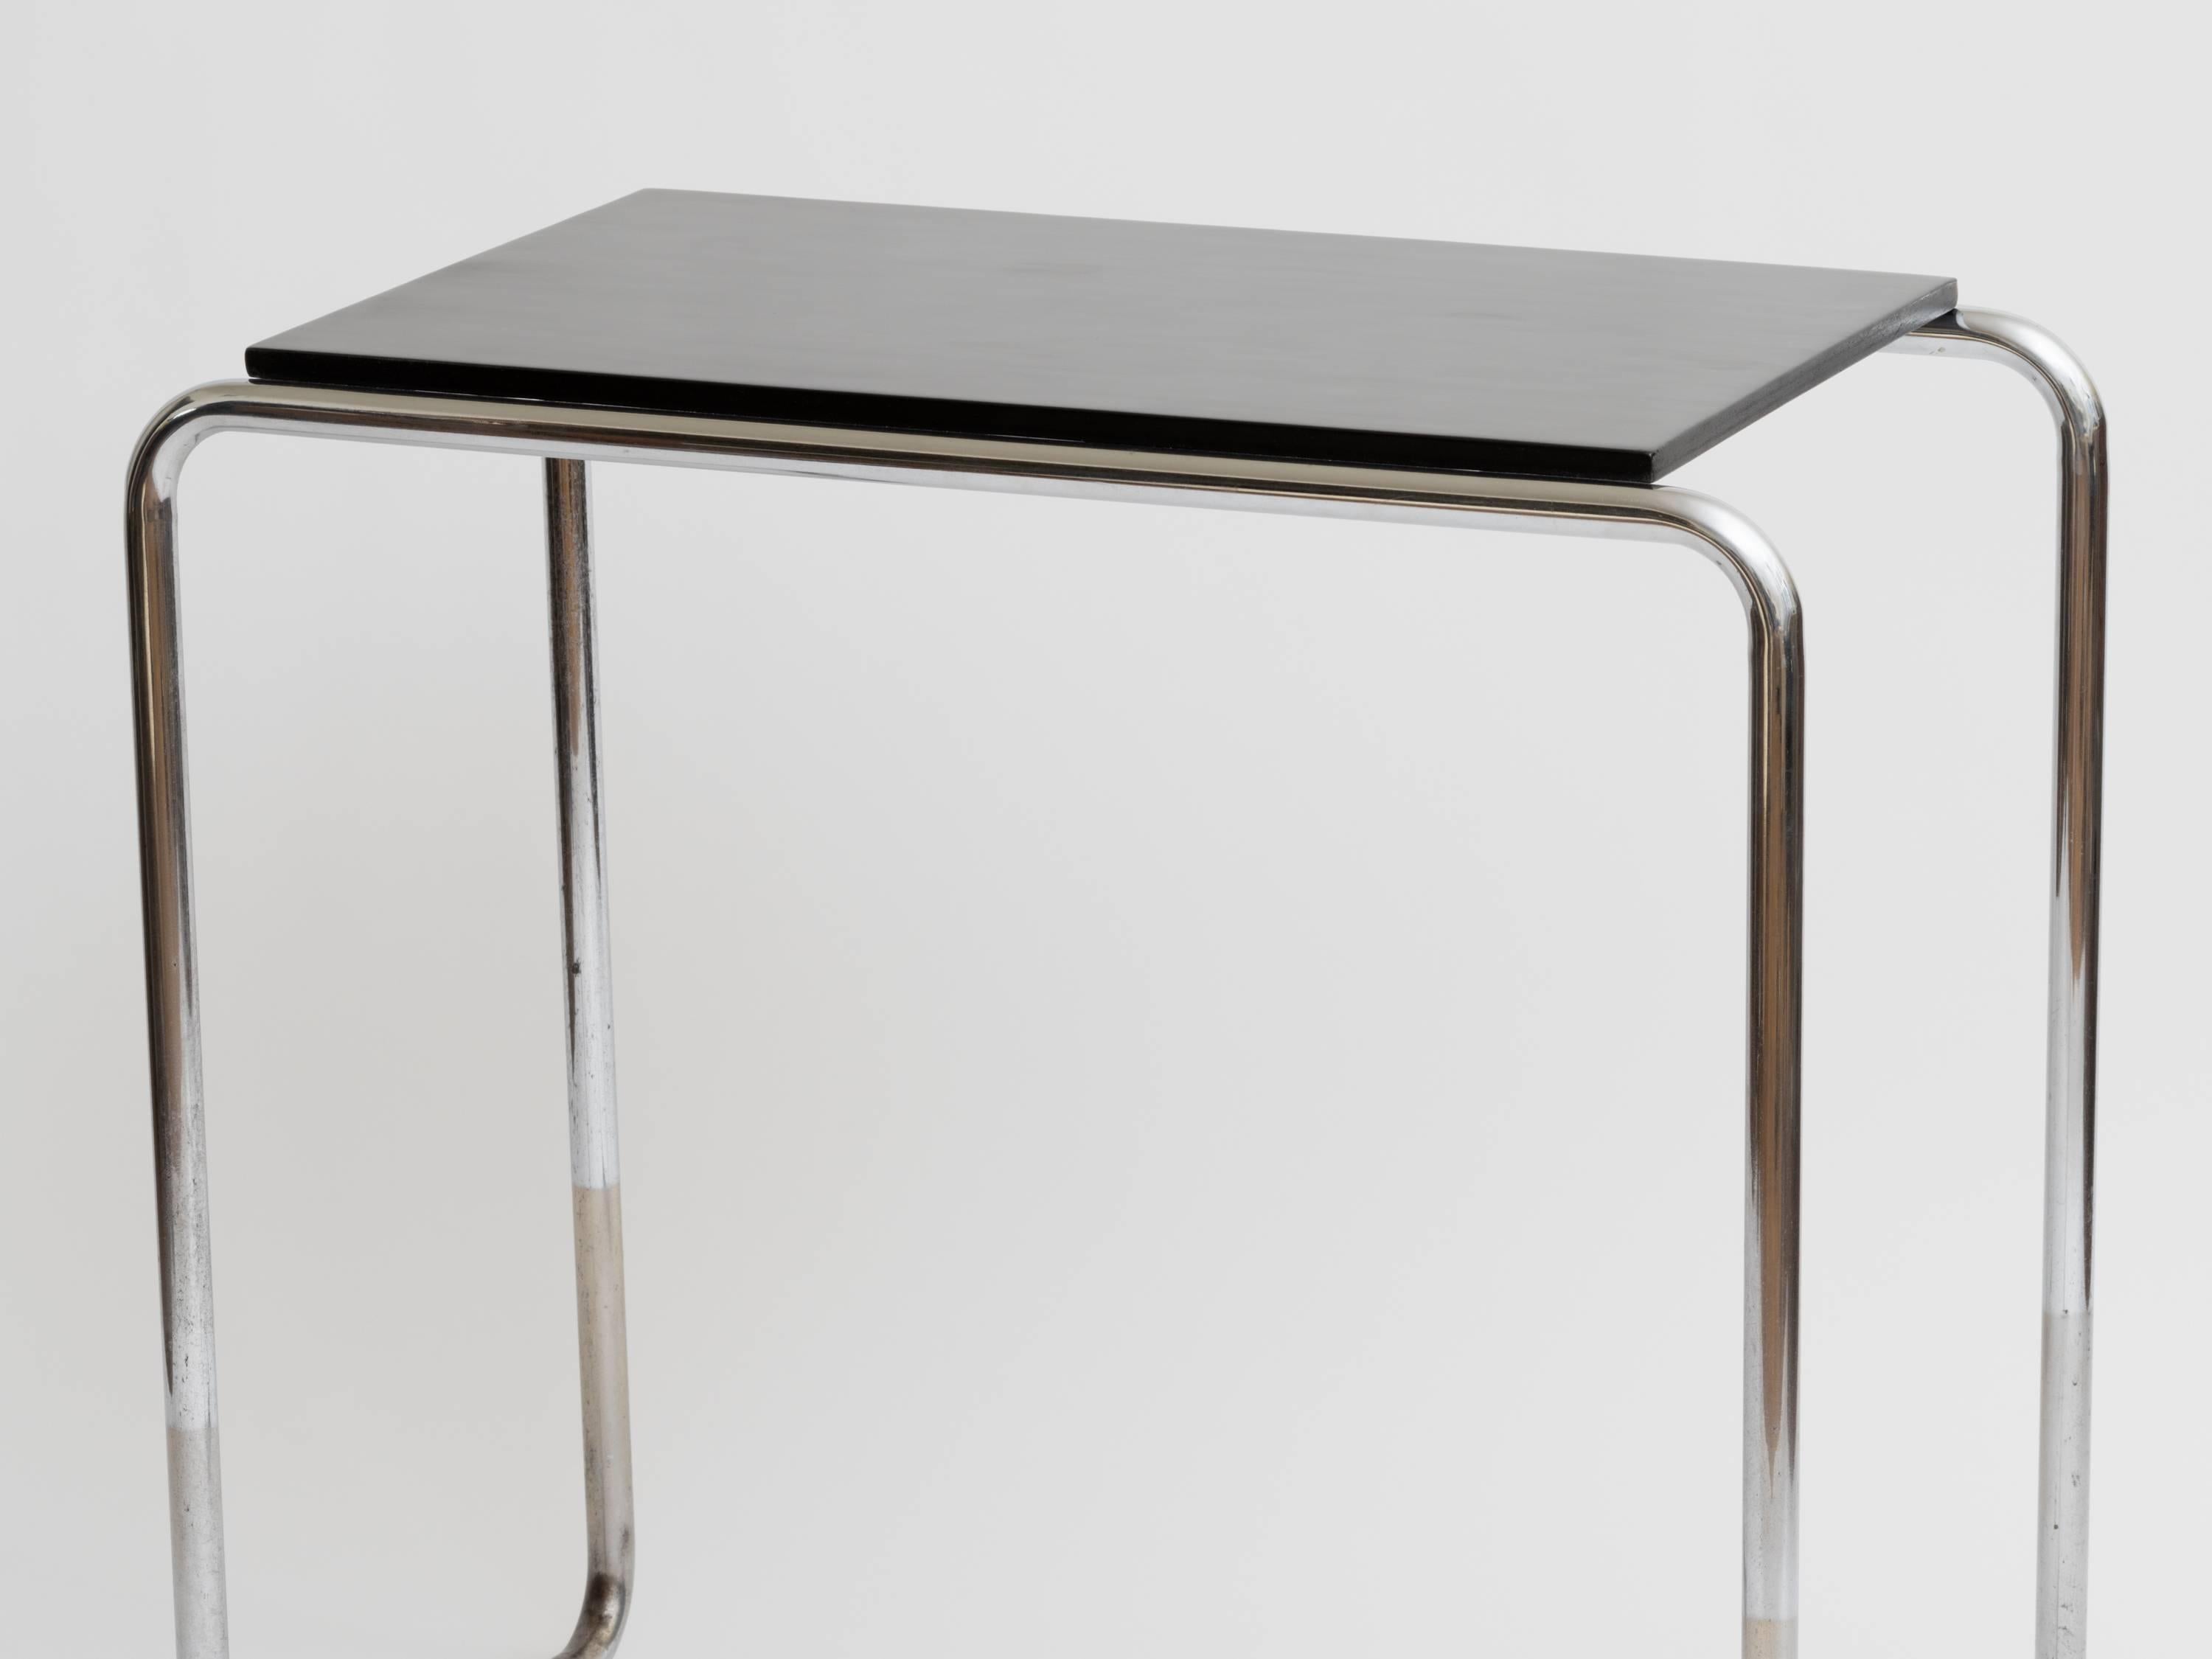 Original 1930s black lacquered table with tubular metal legs in the style of Marcel Breuer. Has a variety of uses, console, bar, small desk or vanity.